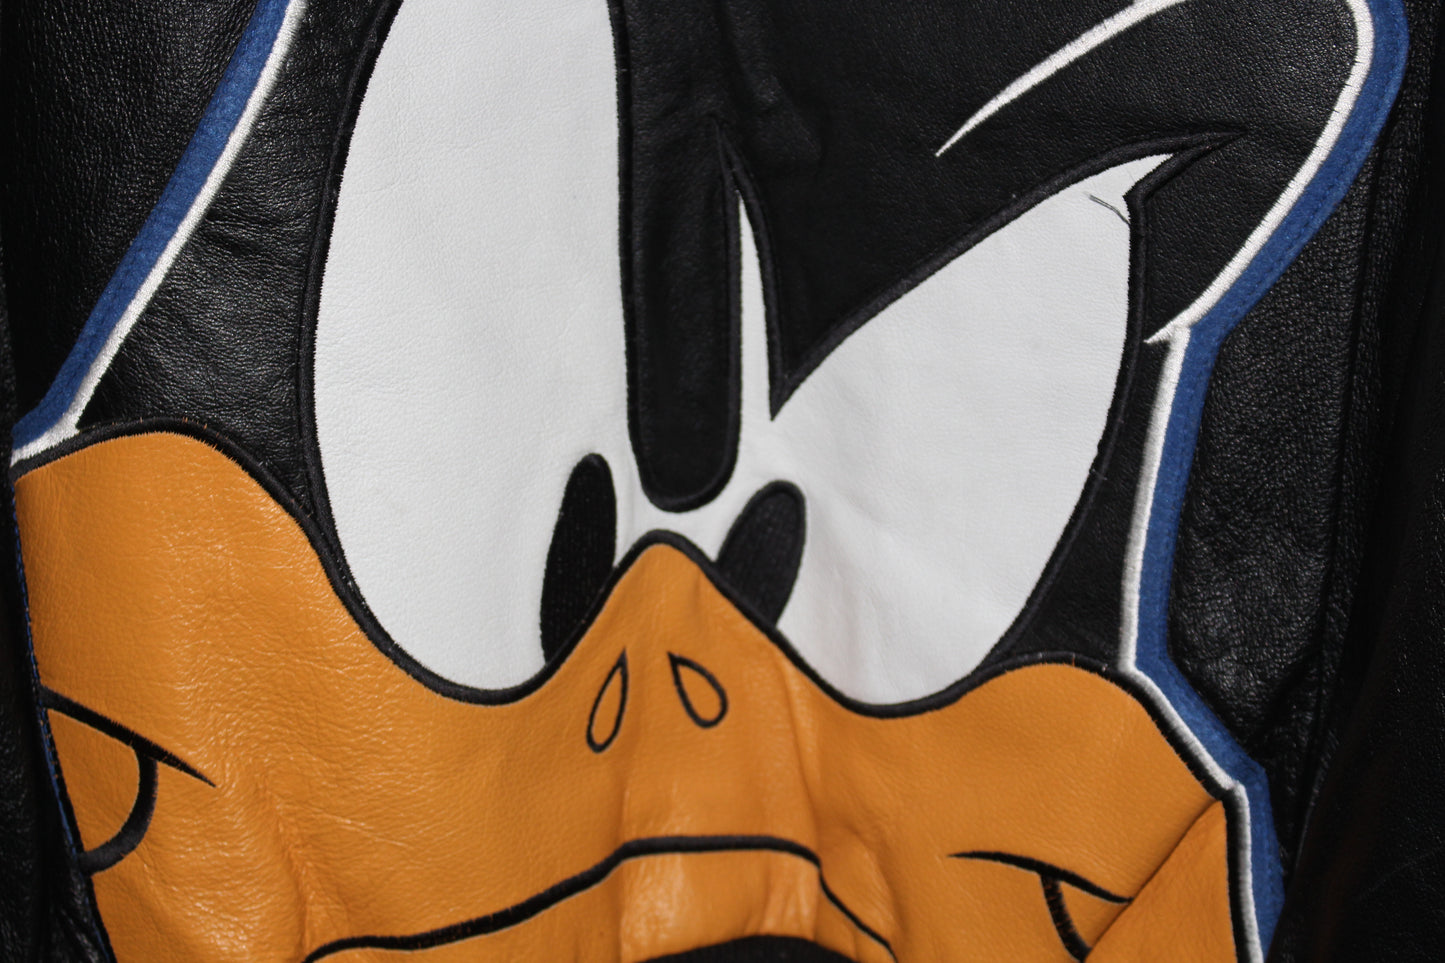 Rare Daffy Duck Classic Looney Tunes Collection Leather Jacket (M)